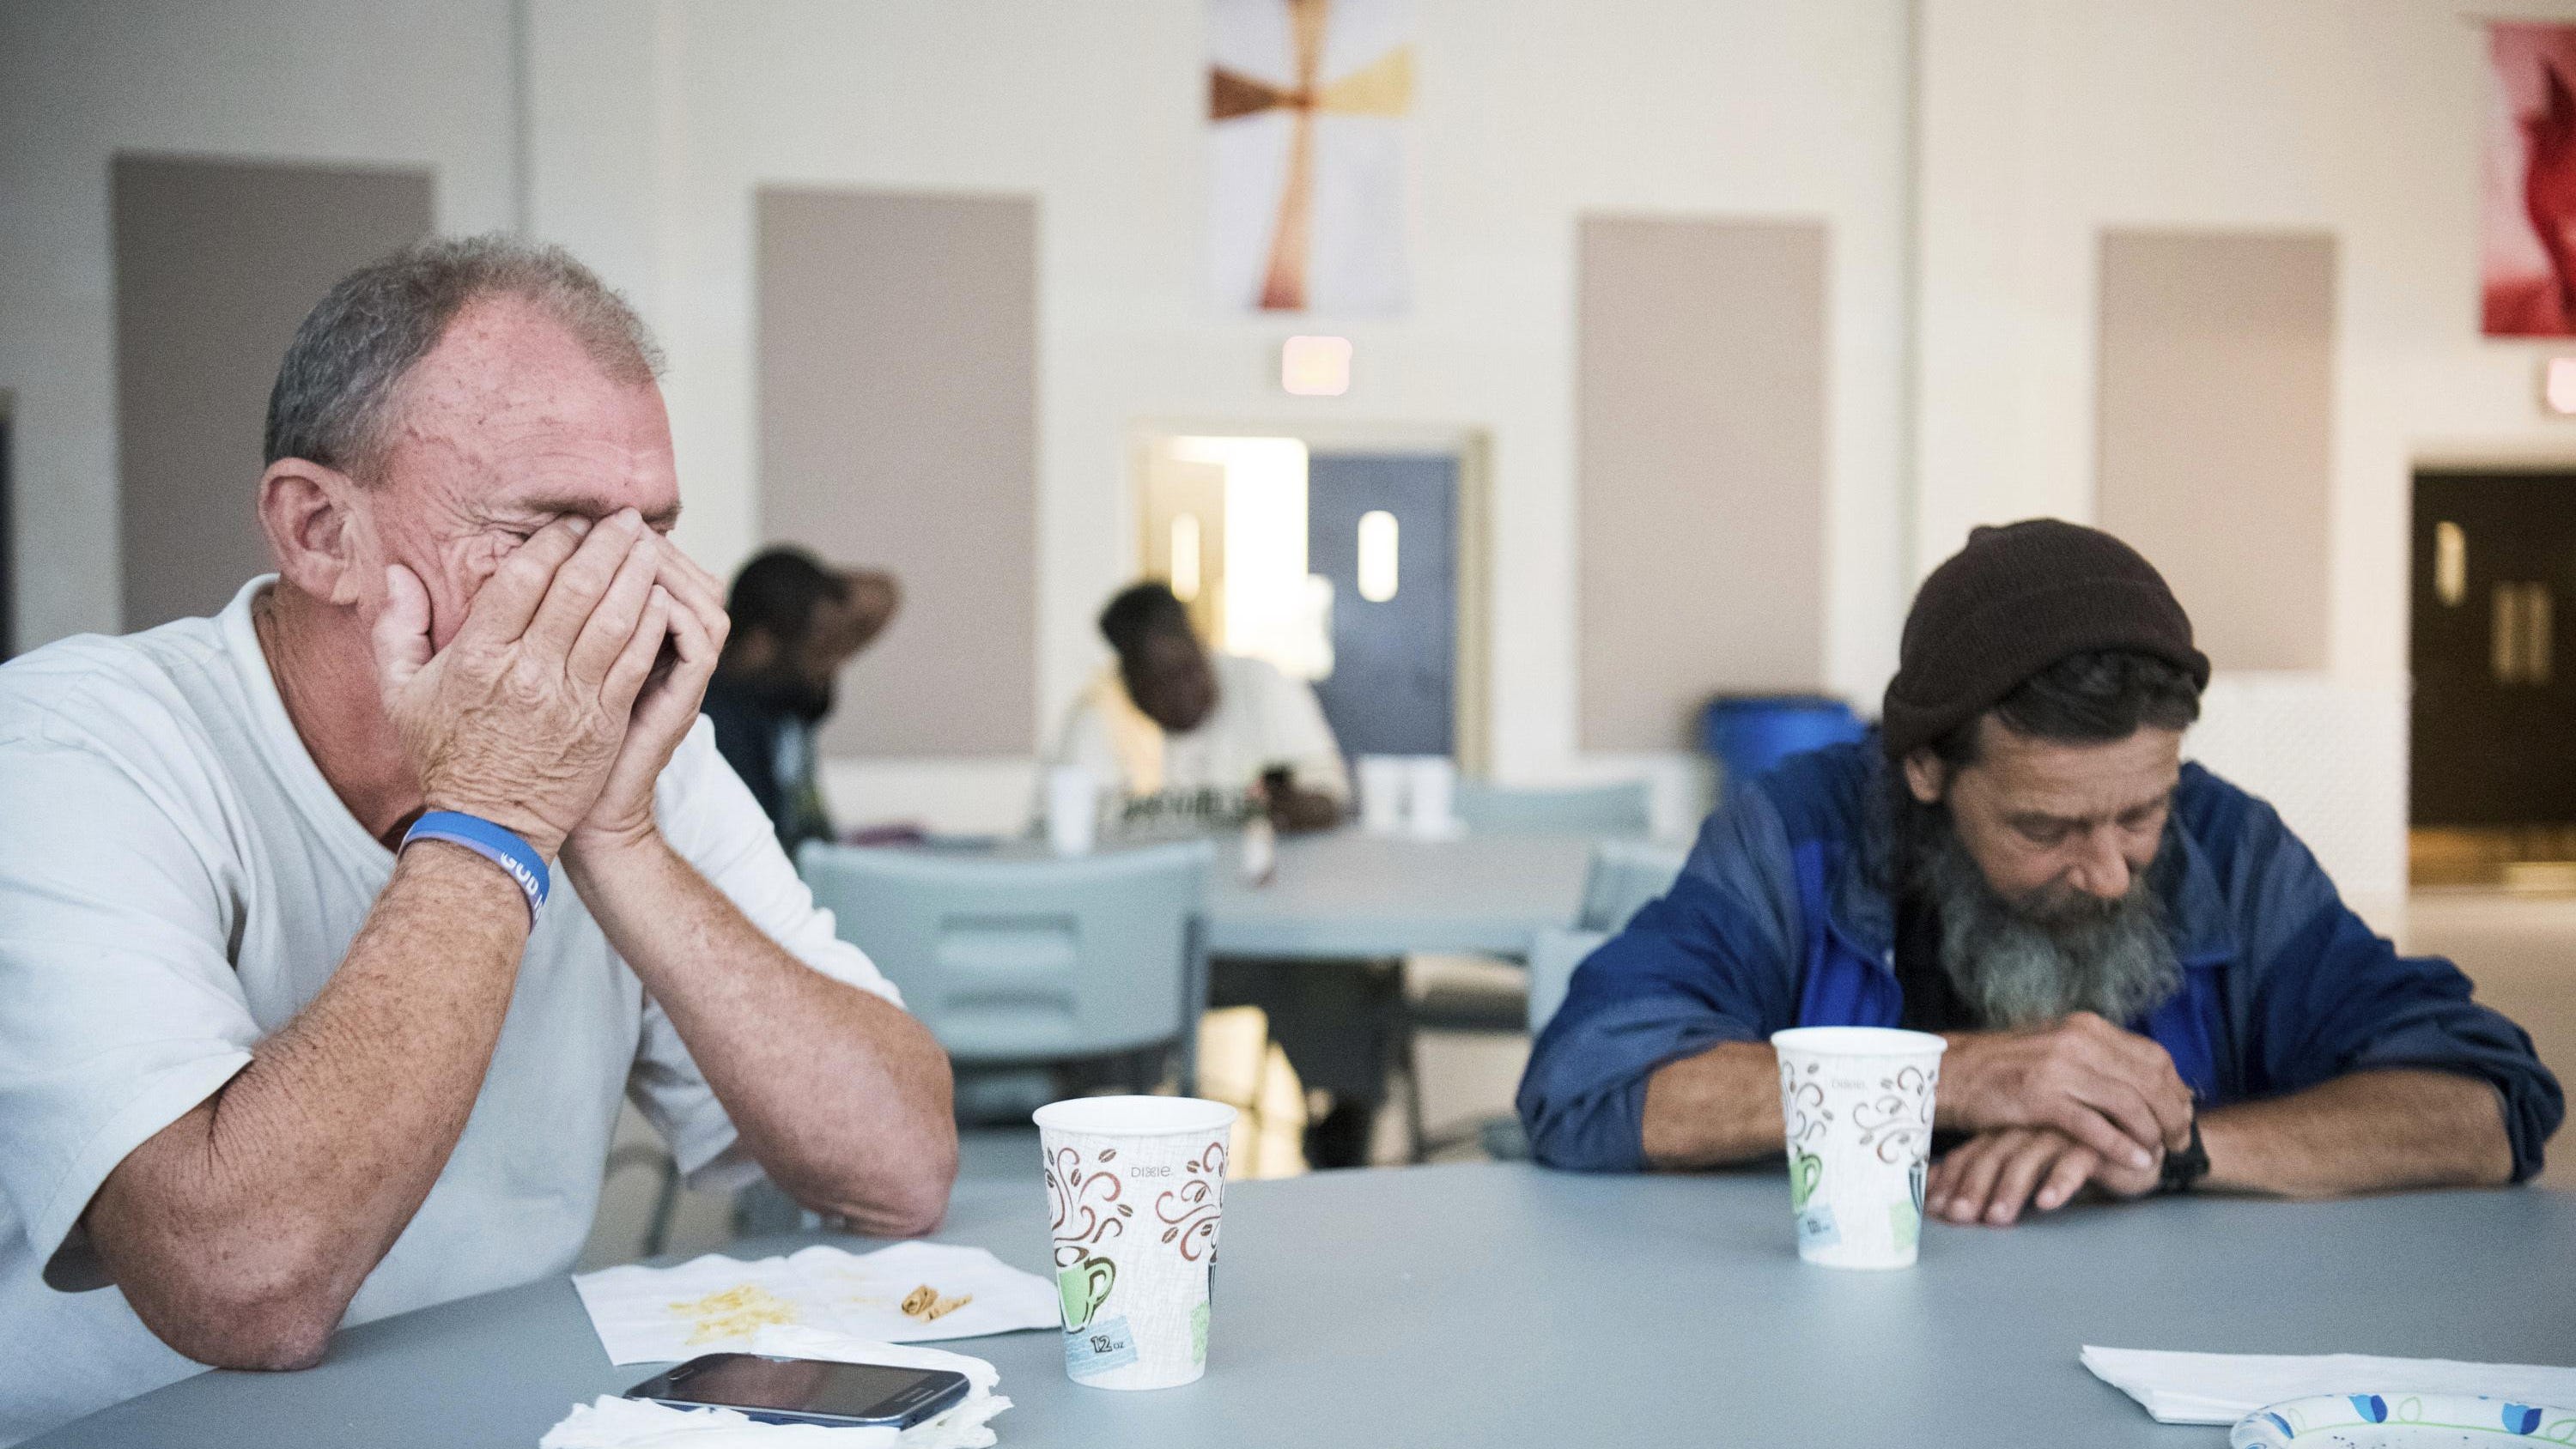 Stephen Mims, left, and David Lloyd wait for the storm to pass in a shelter at Washington Street United Methodist Church as remnants of Florence slowly move across the East Coast Saturday, Sept. 15, 2018, in Columbia, S.C. With rivers rising toward record levels, thousands of people were ordered to evacuate for fear the next few days could bring the most destructive round of flooding in North Carolina history. (AP Photo/Sean Rayford)